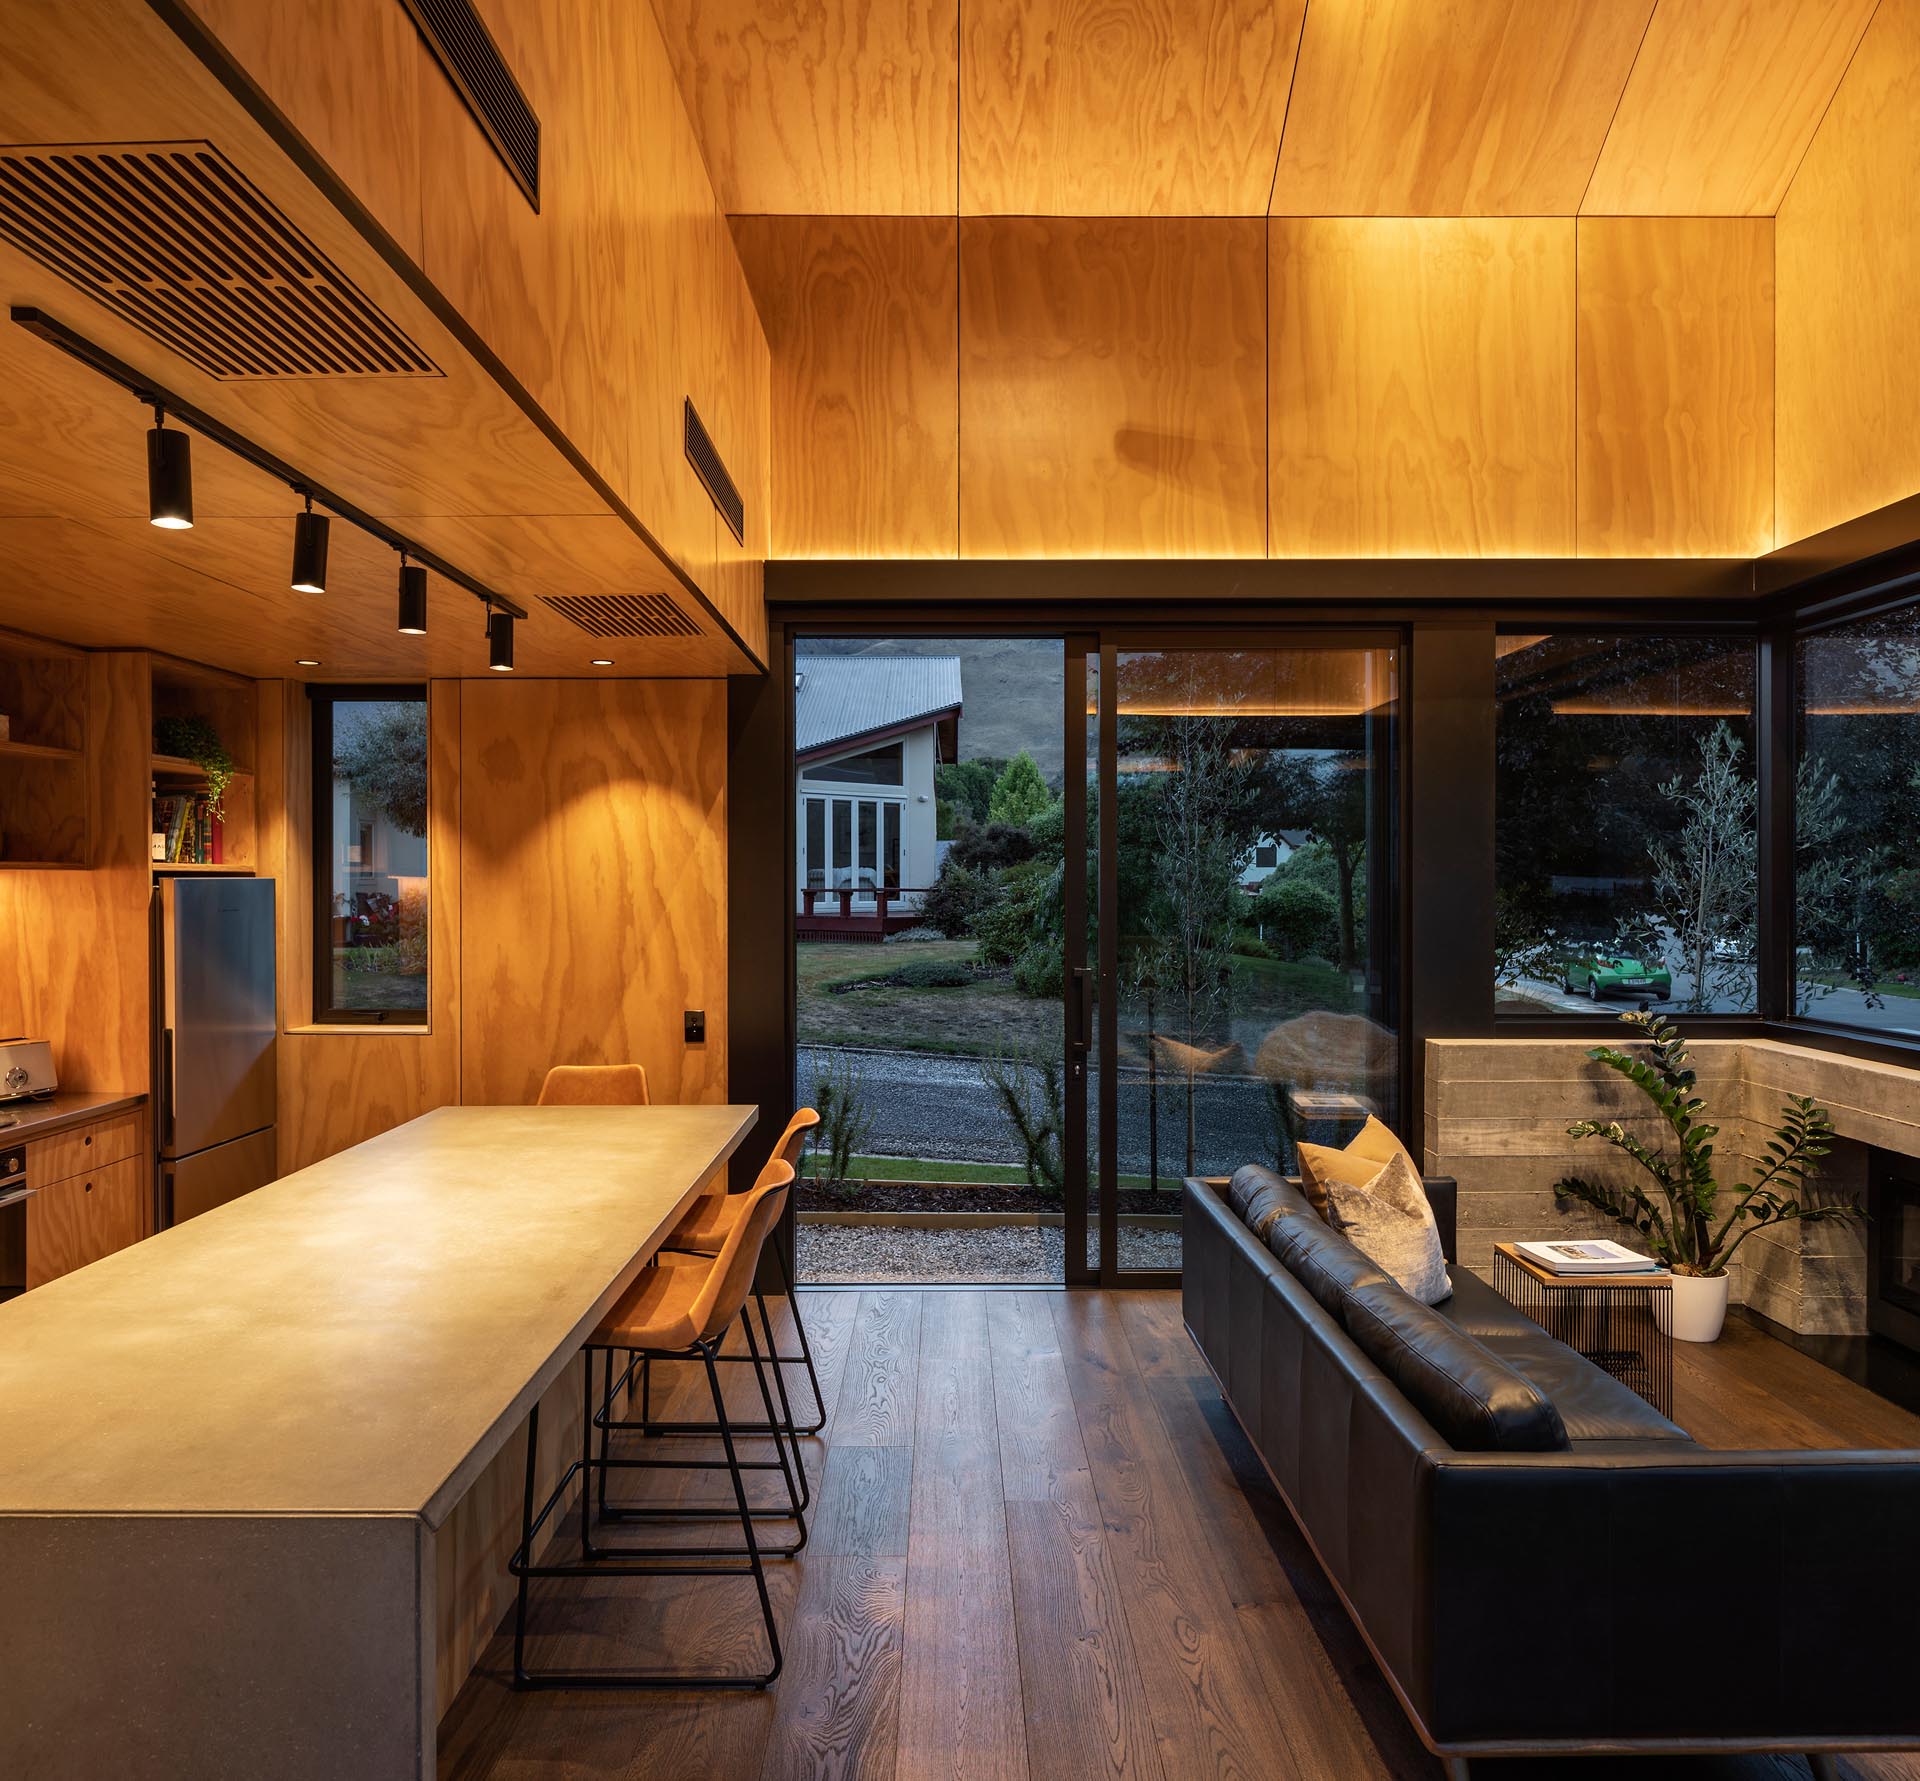 The lower floor of this small home contains a double-height living and kitchen space, with hidden lighting that highlights the wood ceiling. 